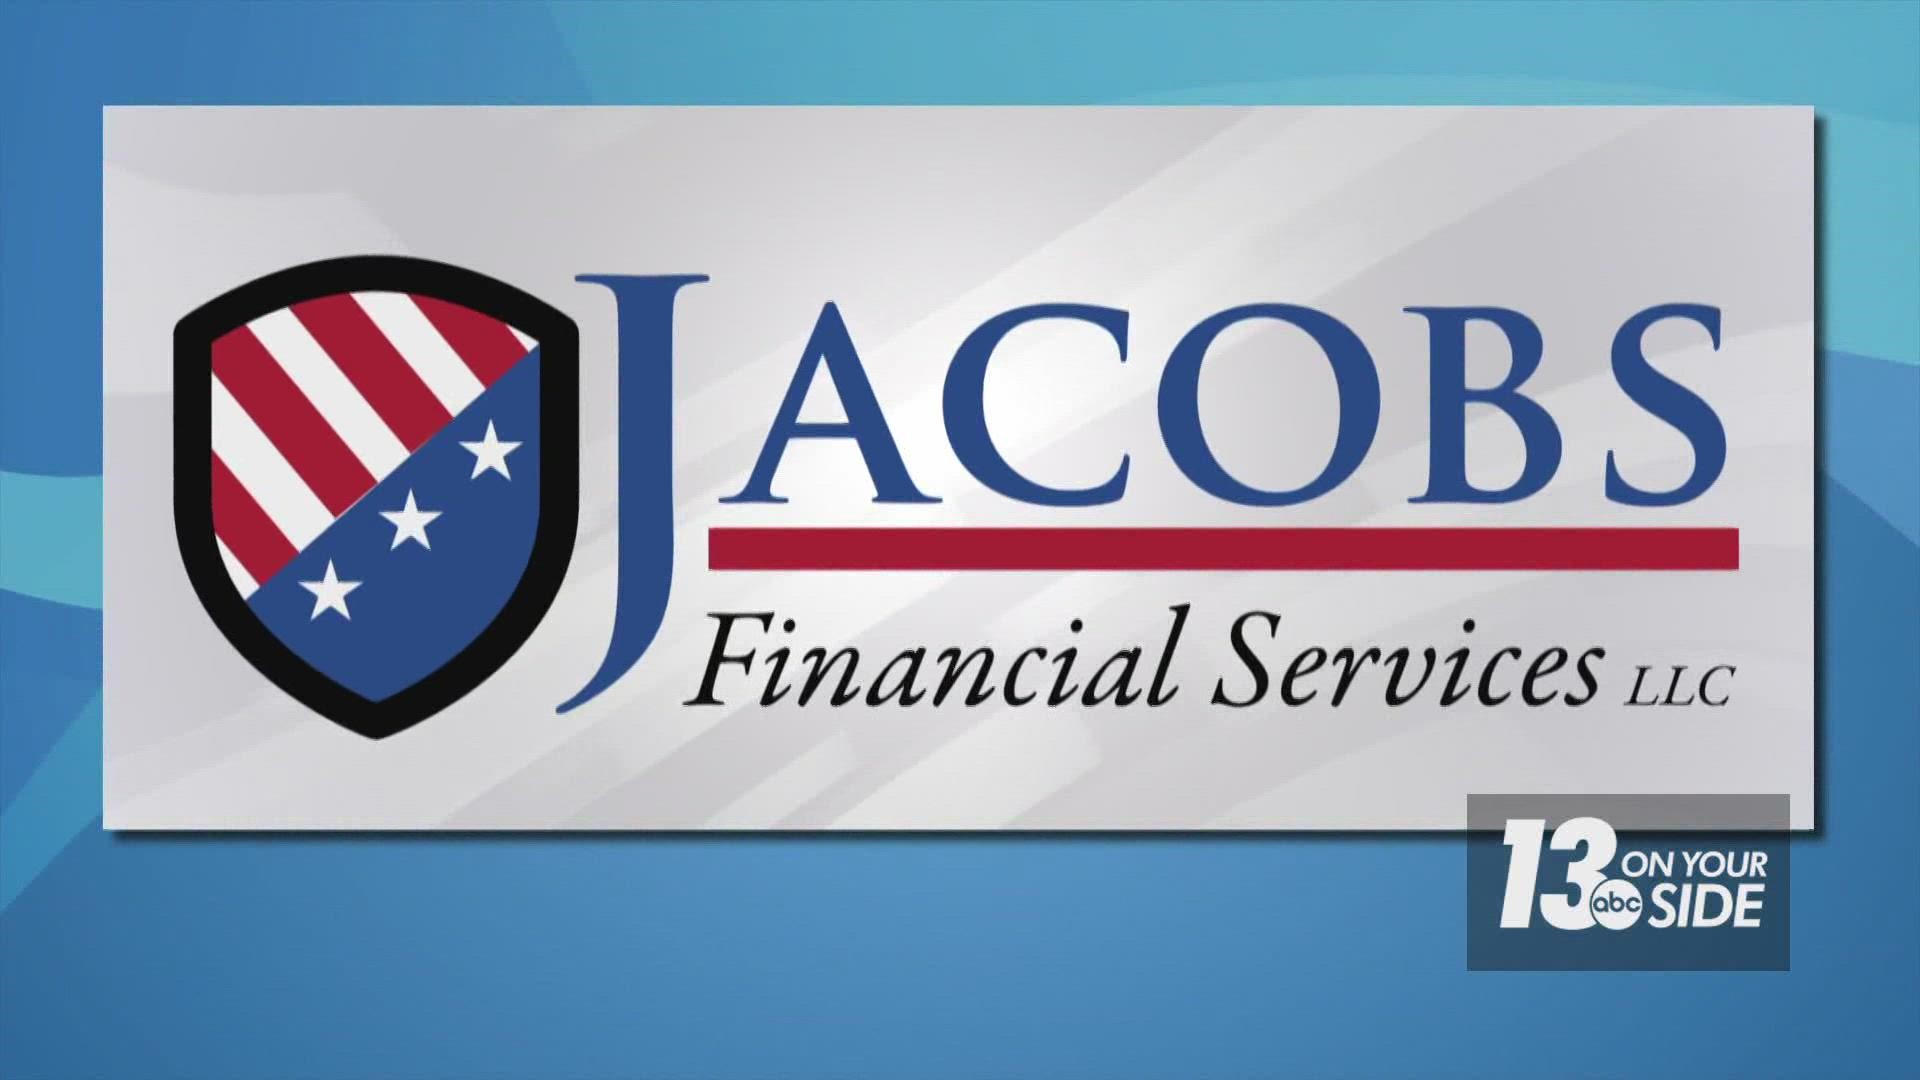 Tom Jacobs and the team at Jacobs Financial Services can help you get your retirement going in the direction you want it to go.